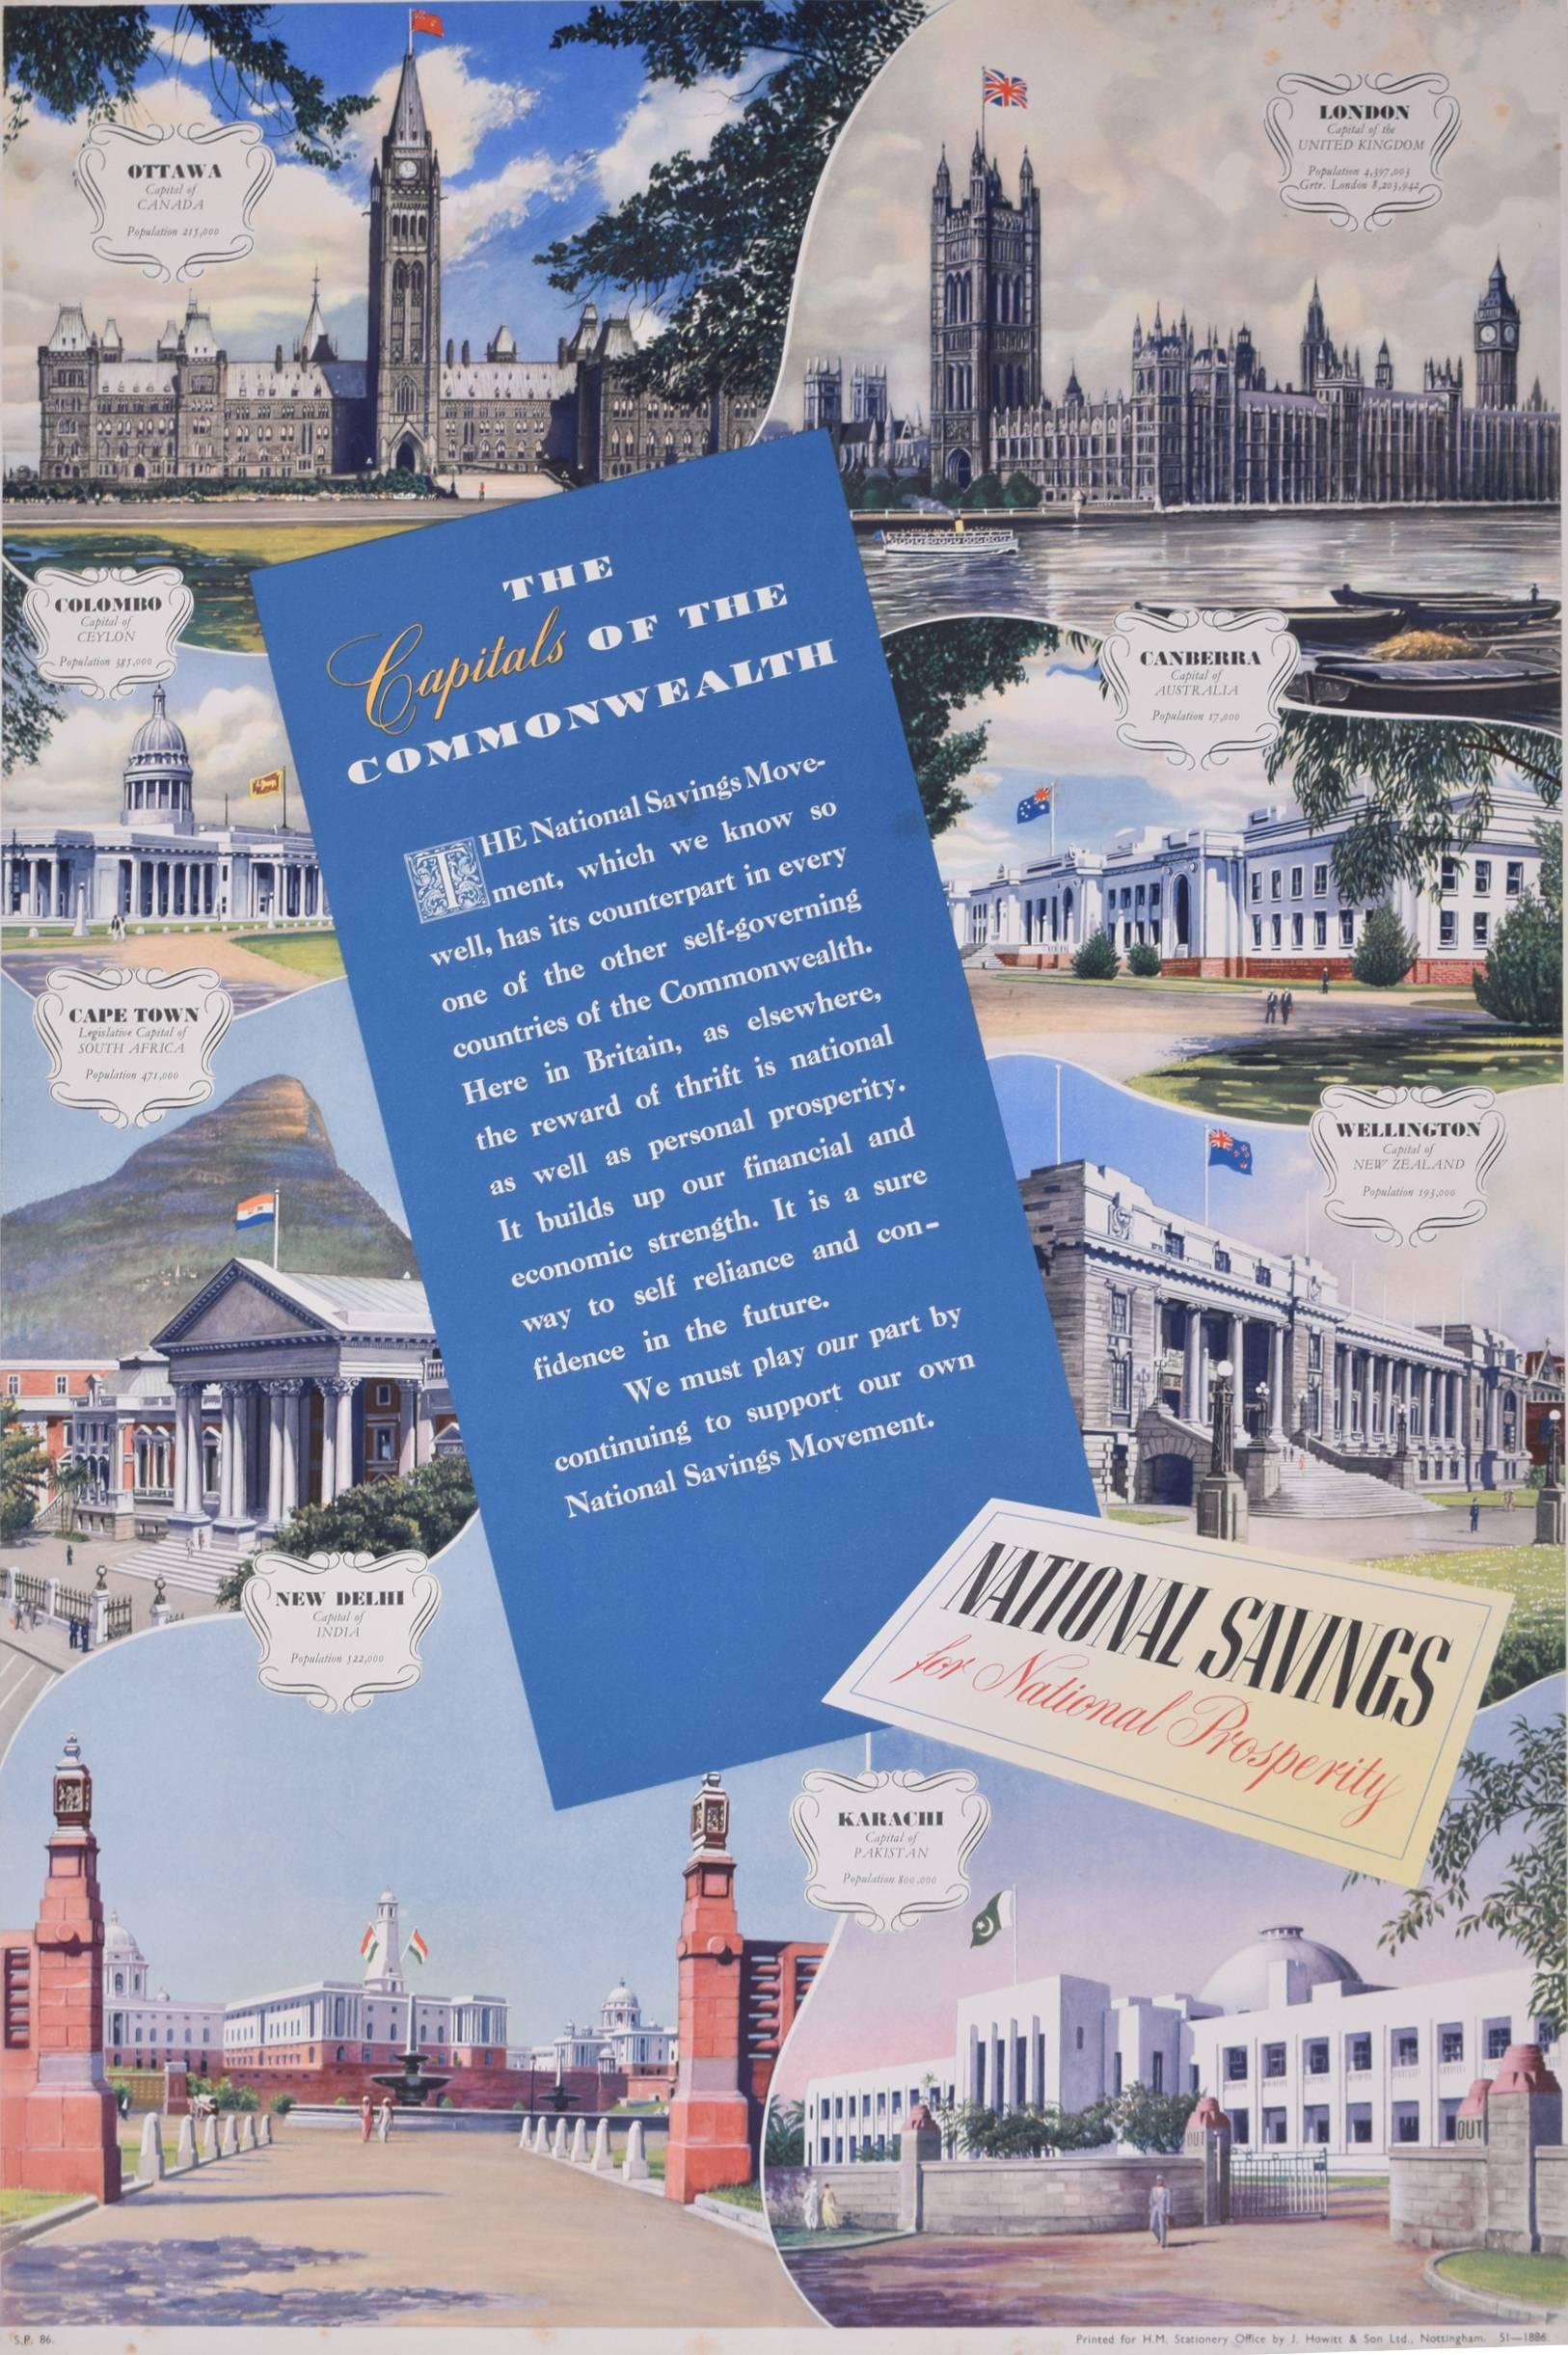 Unknown Print - The Capitals of the Commonwealth Original National Savings Poster c. 1950